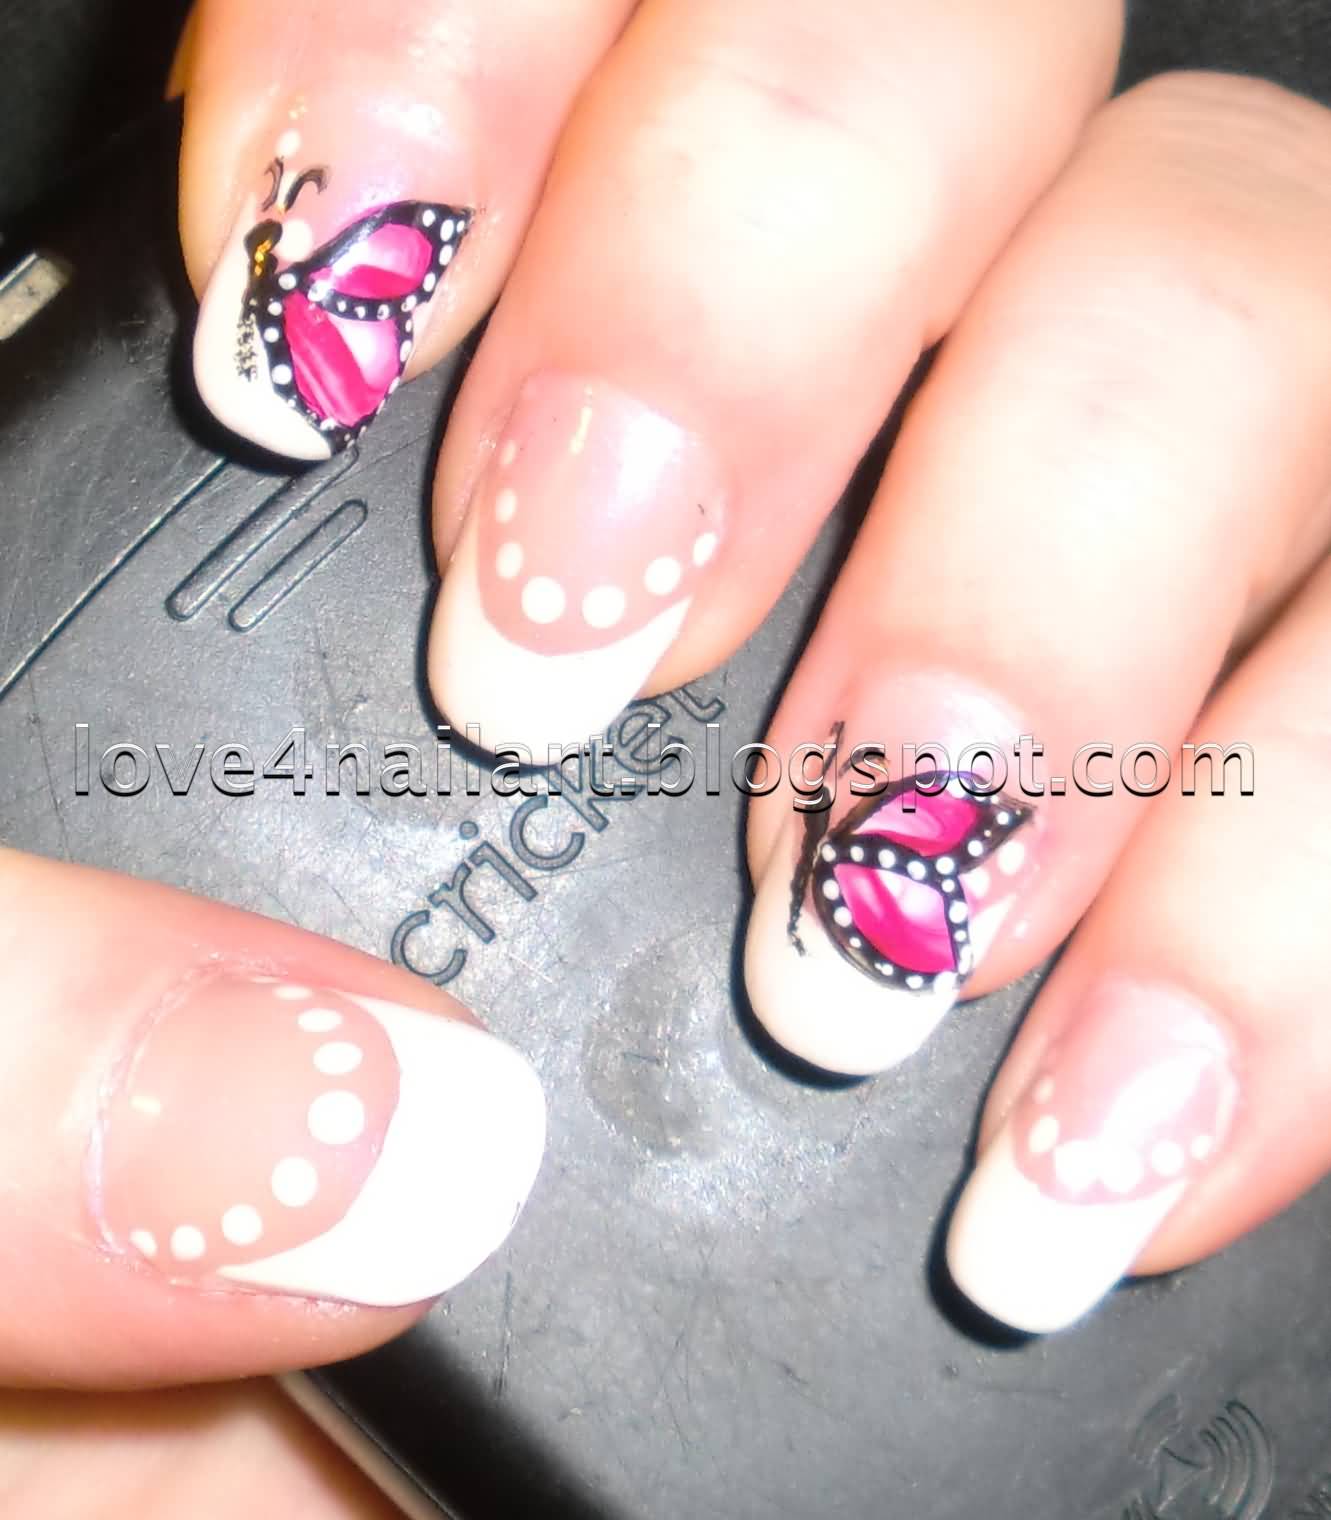 White Tip And Polka Dots Nails With Pink Butterflies Nail Art